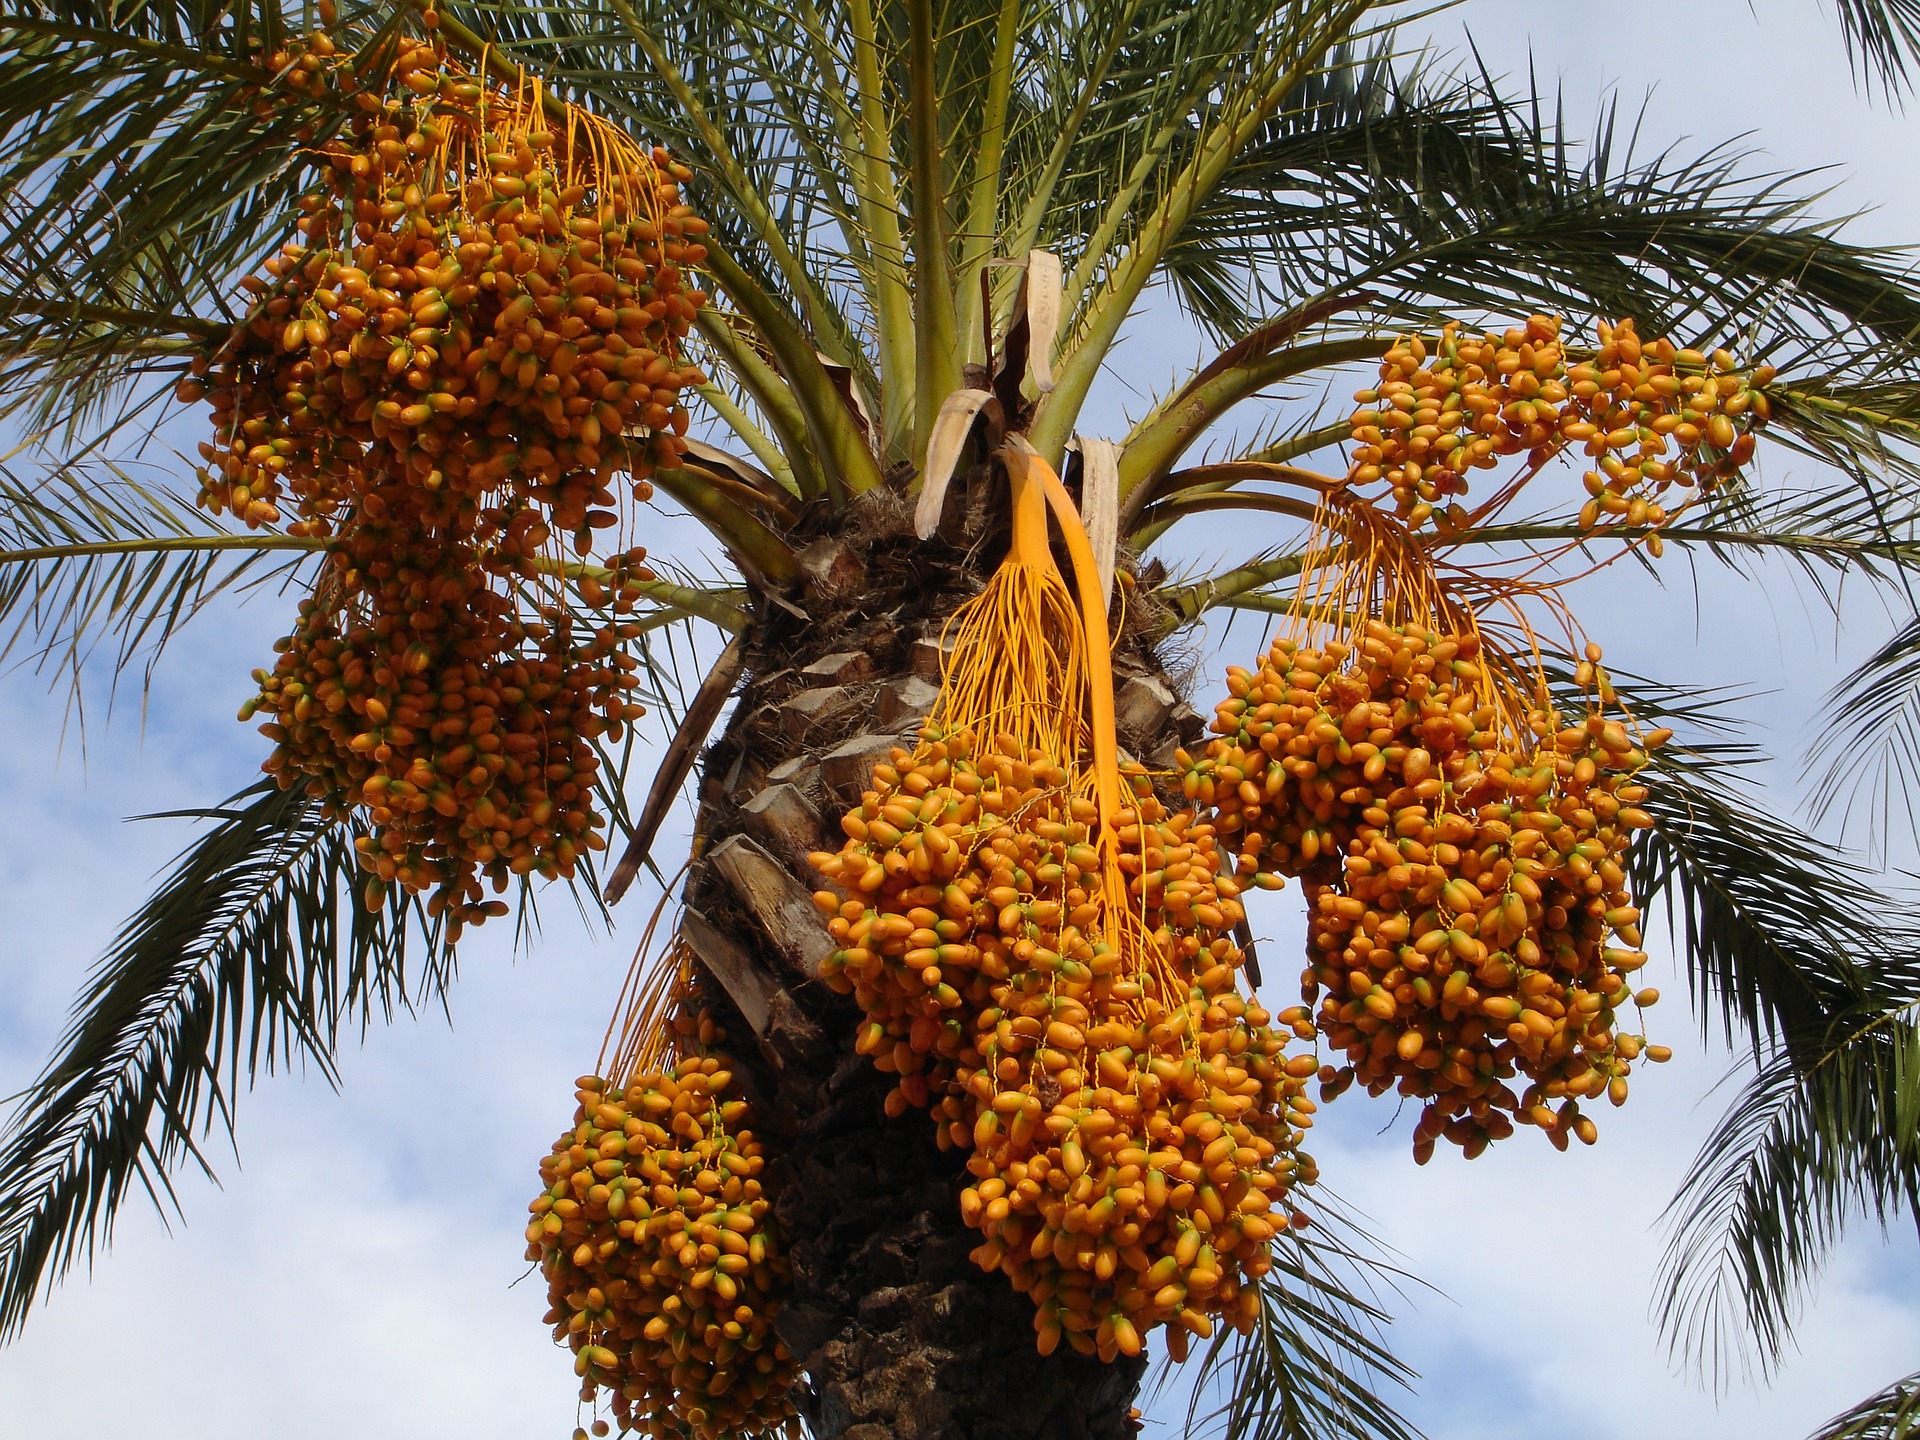 Dates on date palm